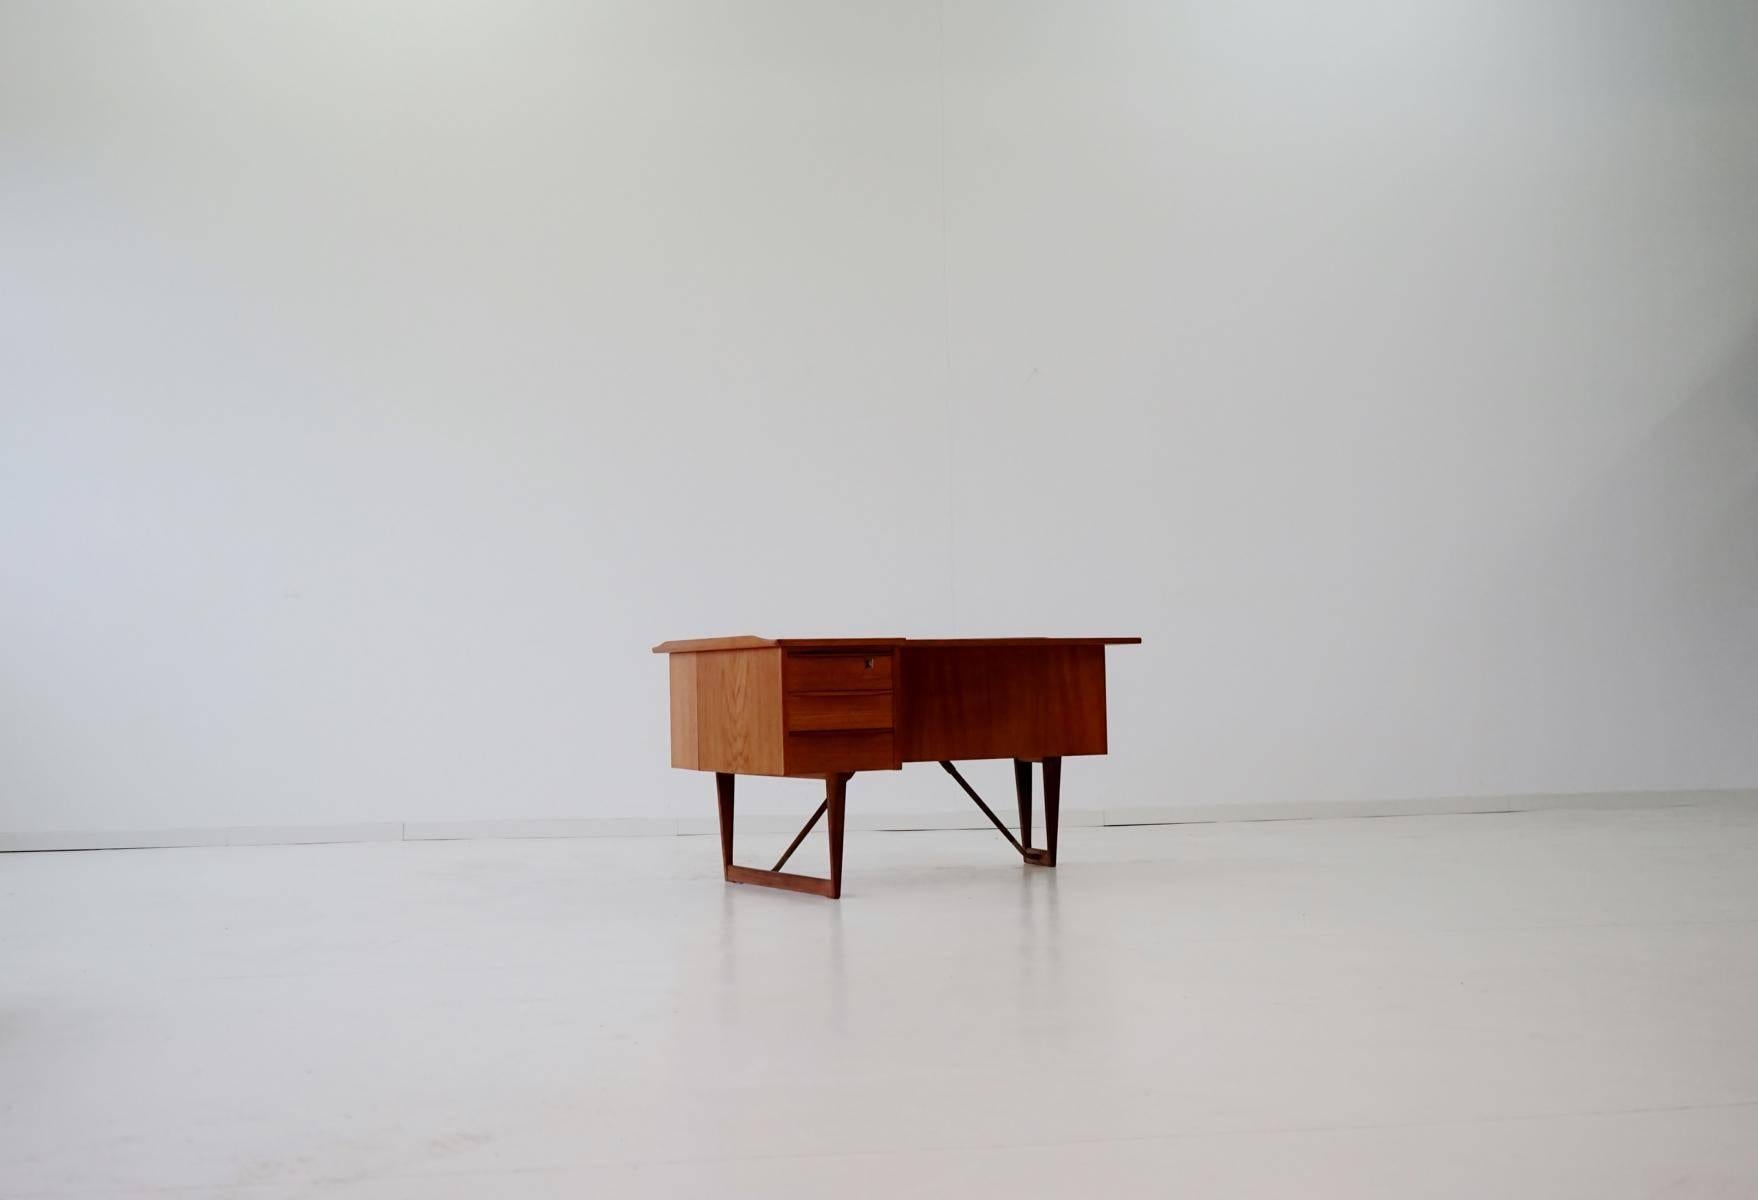 Peter Lovig Nielsen Teak Boomerang Desk Hedensted Møbelfabrik
This midcentury design Classic was made in Denmark by Hedensted Møbelfabrik. It is very handy. Three lockable drawers on the front and shelves (one with a door, lockable) on the back of